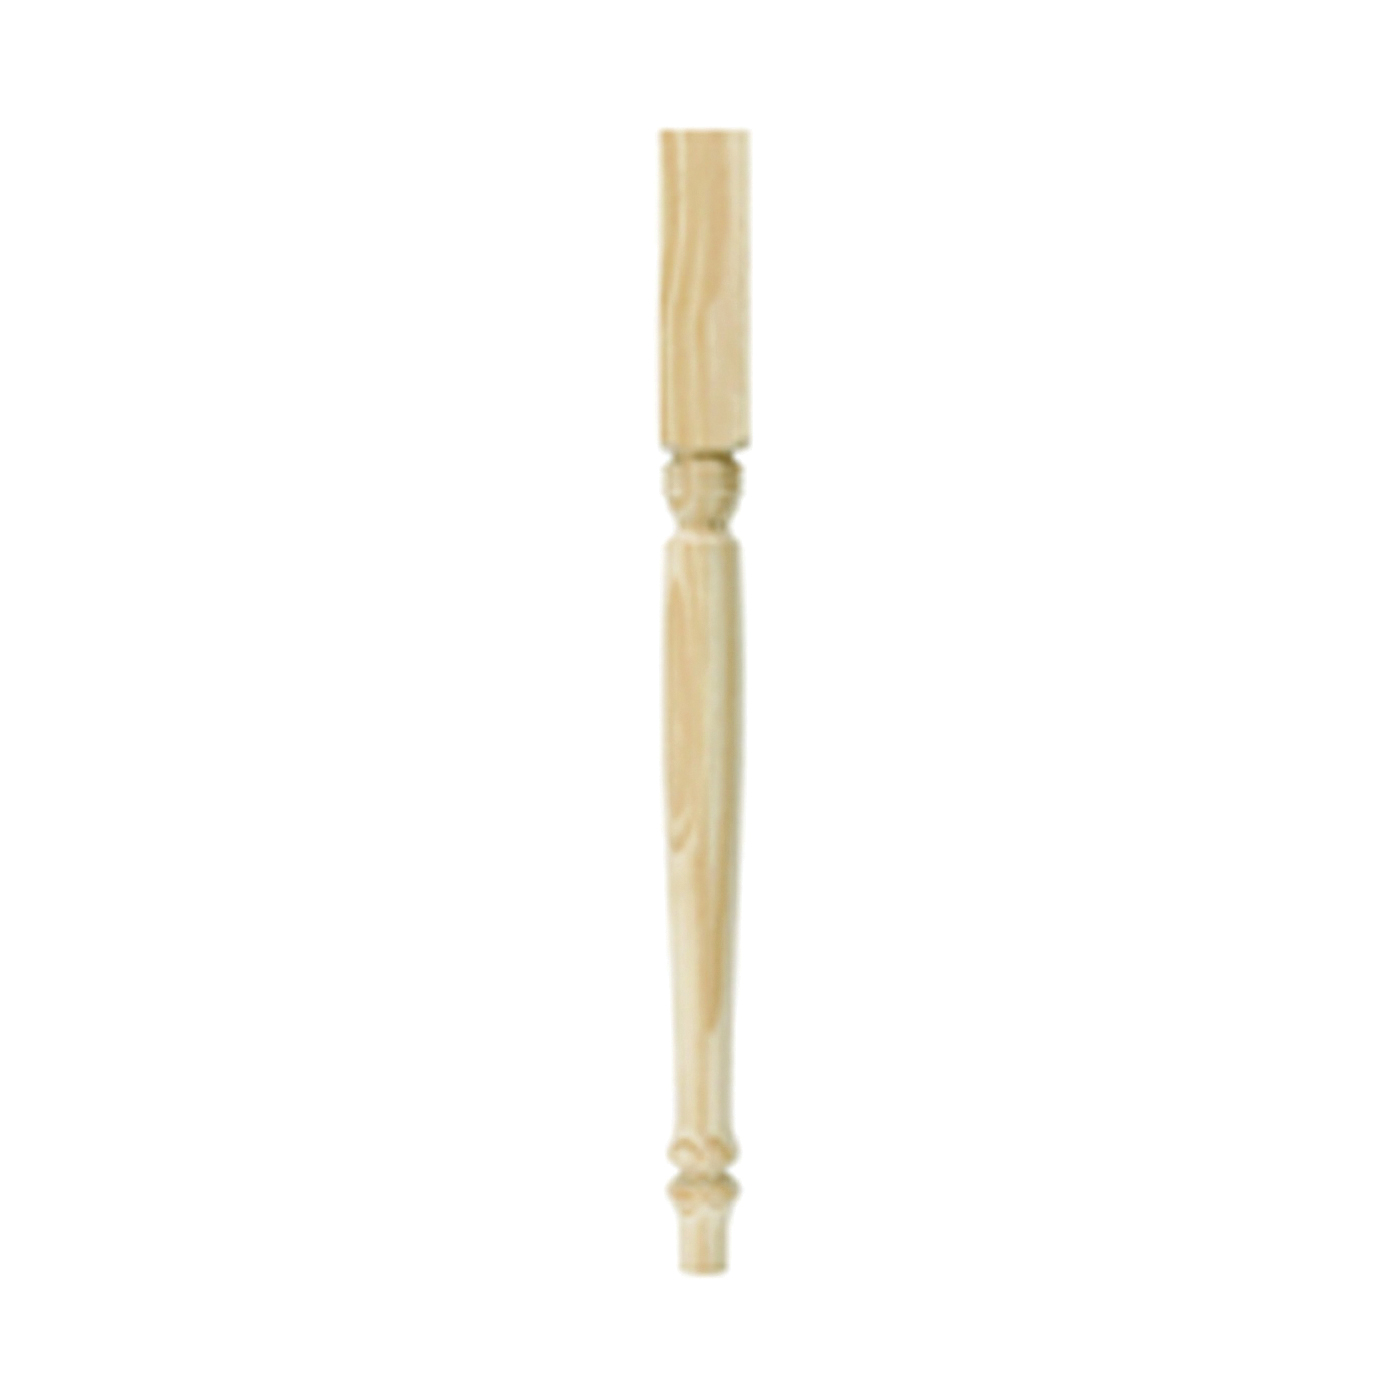 2912 Table Leg, 15-1/4 in H, 2-1/4 in W, Pine Wood, Beige, Smooth Sanded